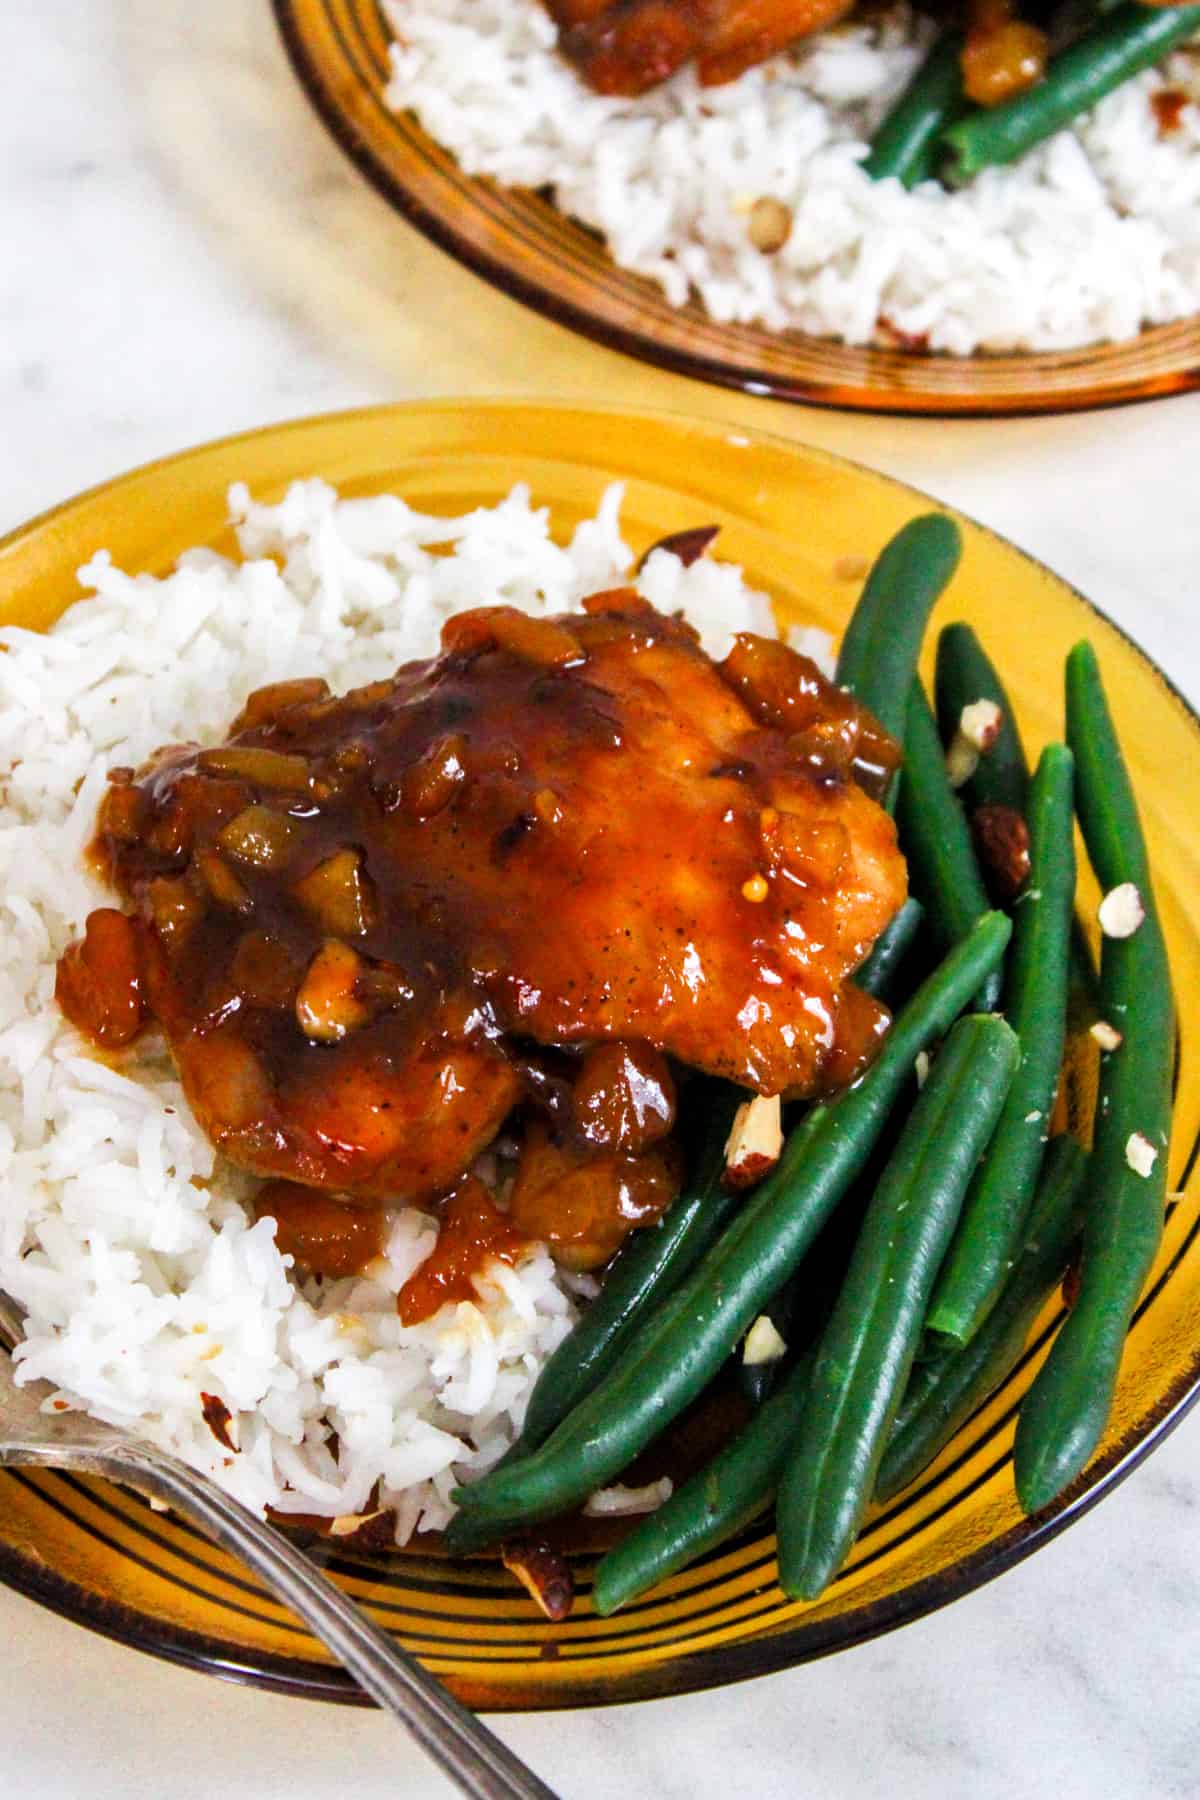 chicken thigh glazed with apricot sauce on a bed of white rice and green beans, served on a retro brown glass plate